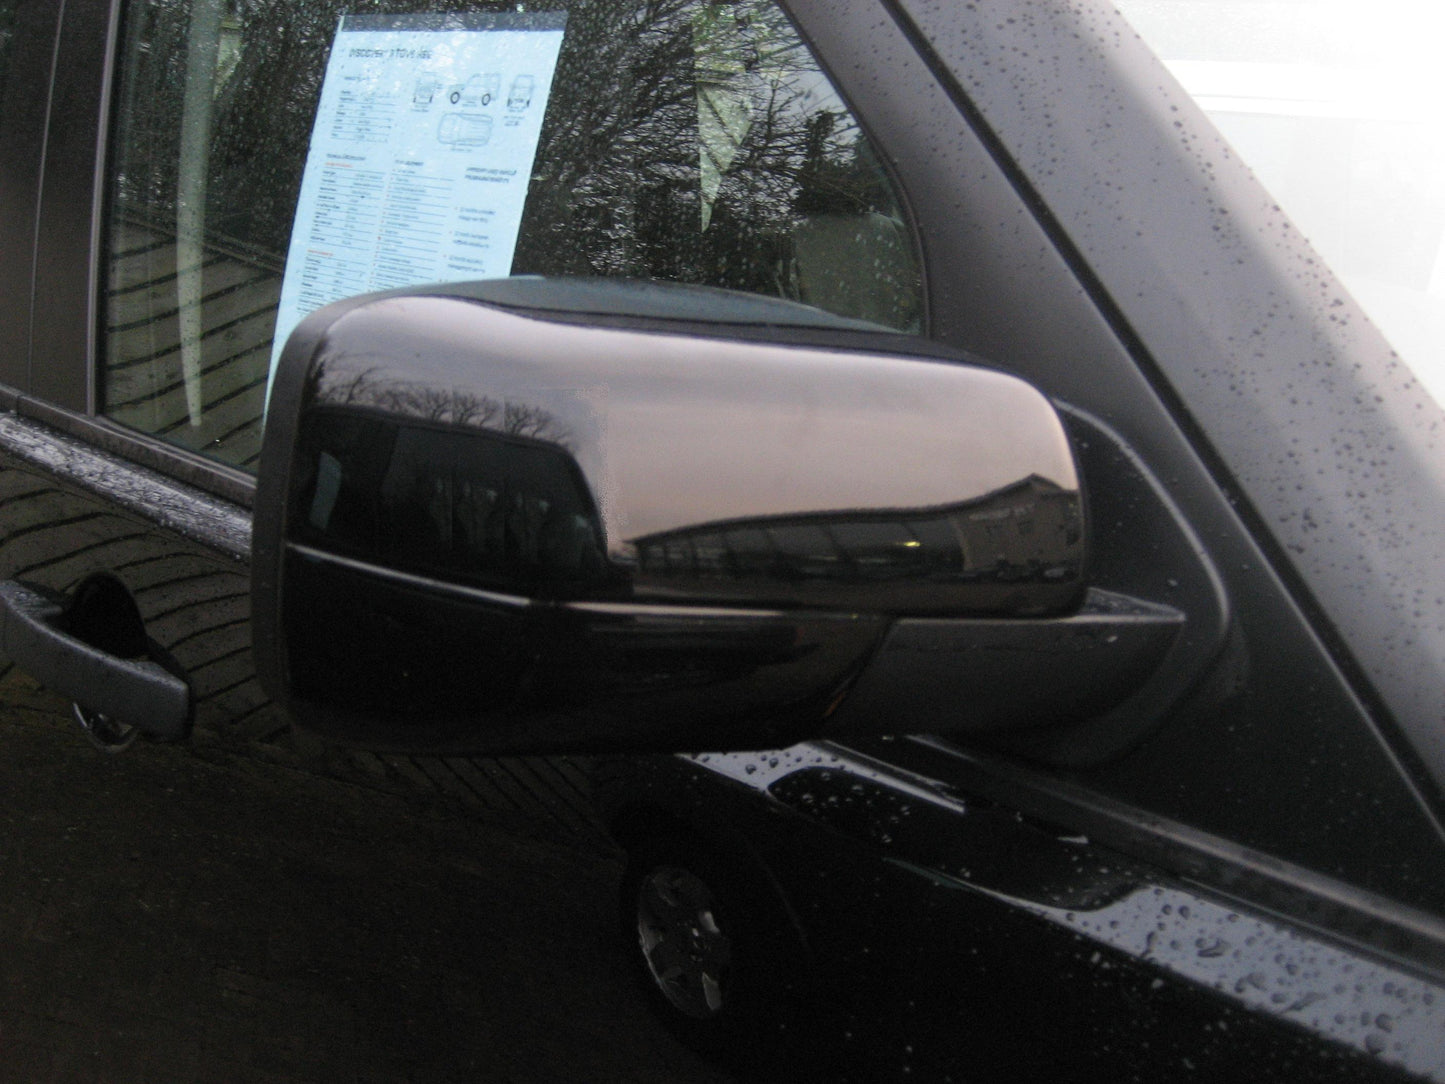 Full Mirror Covers for Land Rover Discovery 3 - Gloss Java Black